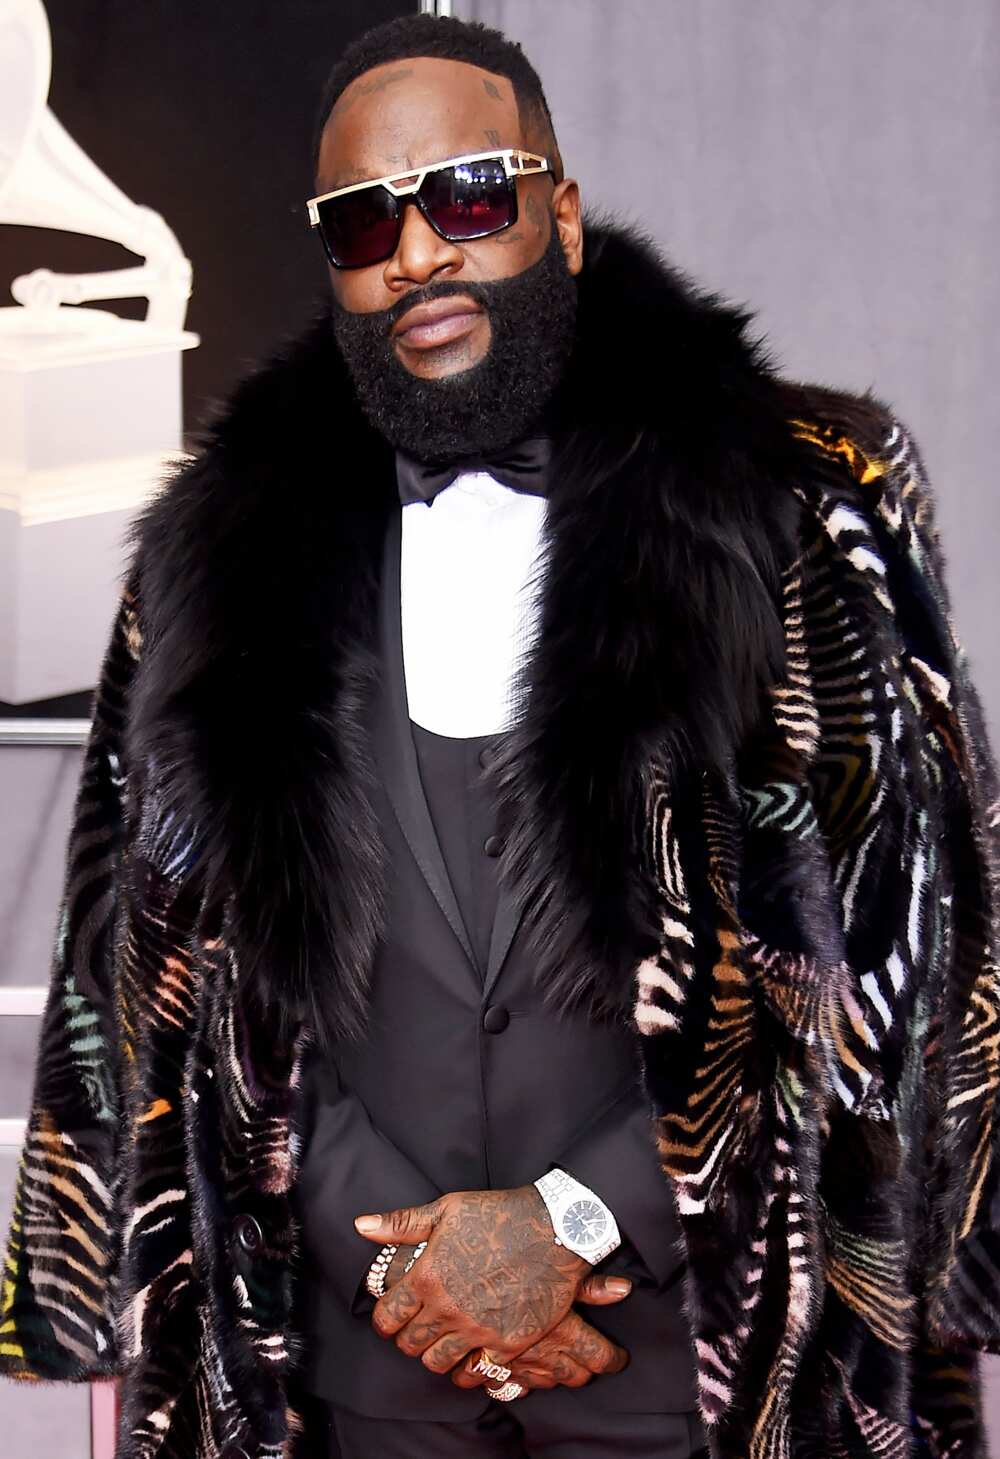 Rick Ross' net worth, houses and luxury cars Legit.ng